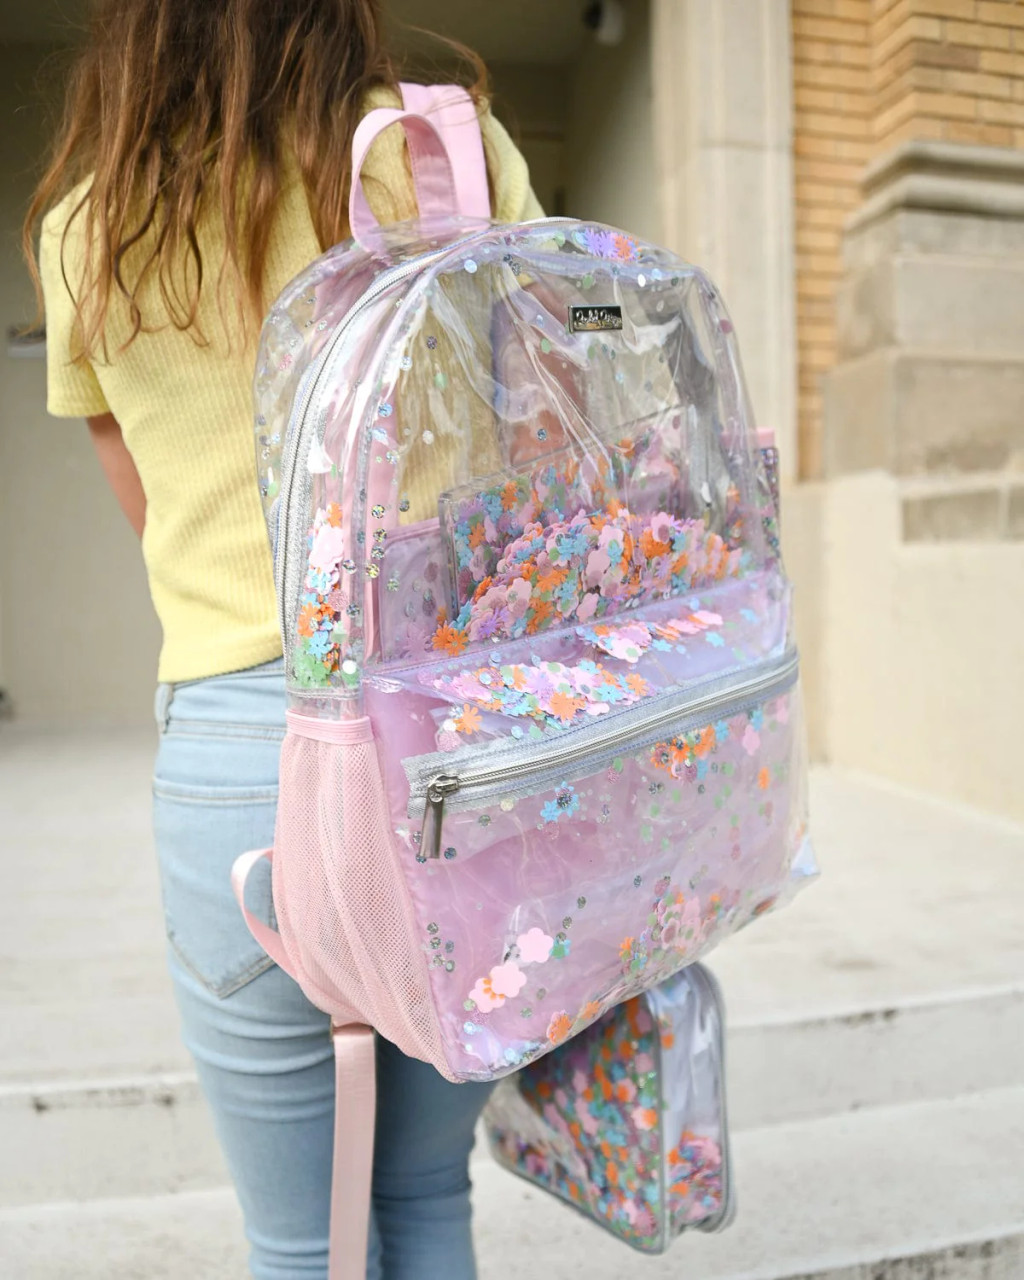 https://cdn11.bigcommerce.com/s-e79p8f/images/stencil/1280x1280/products/20514/50717/flower_confetti_backpack_2__44181.1687877669.jpg?c=2